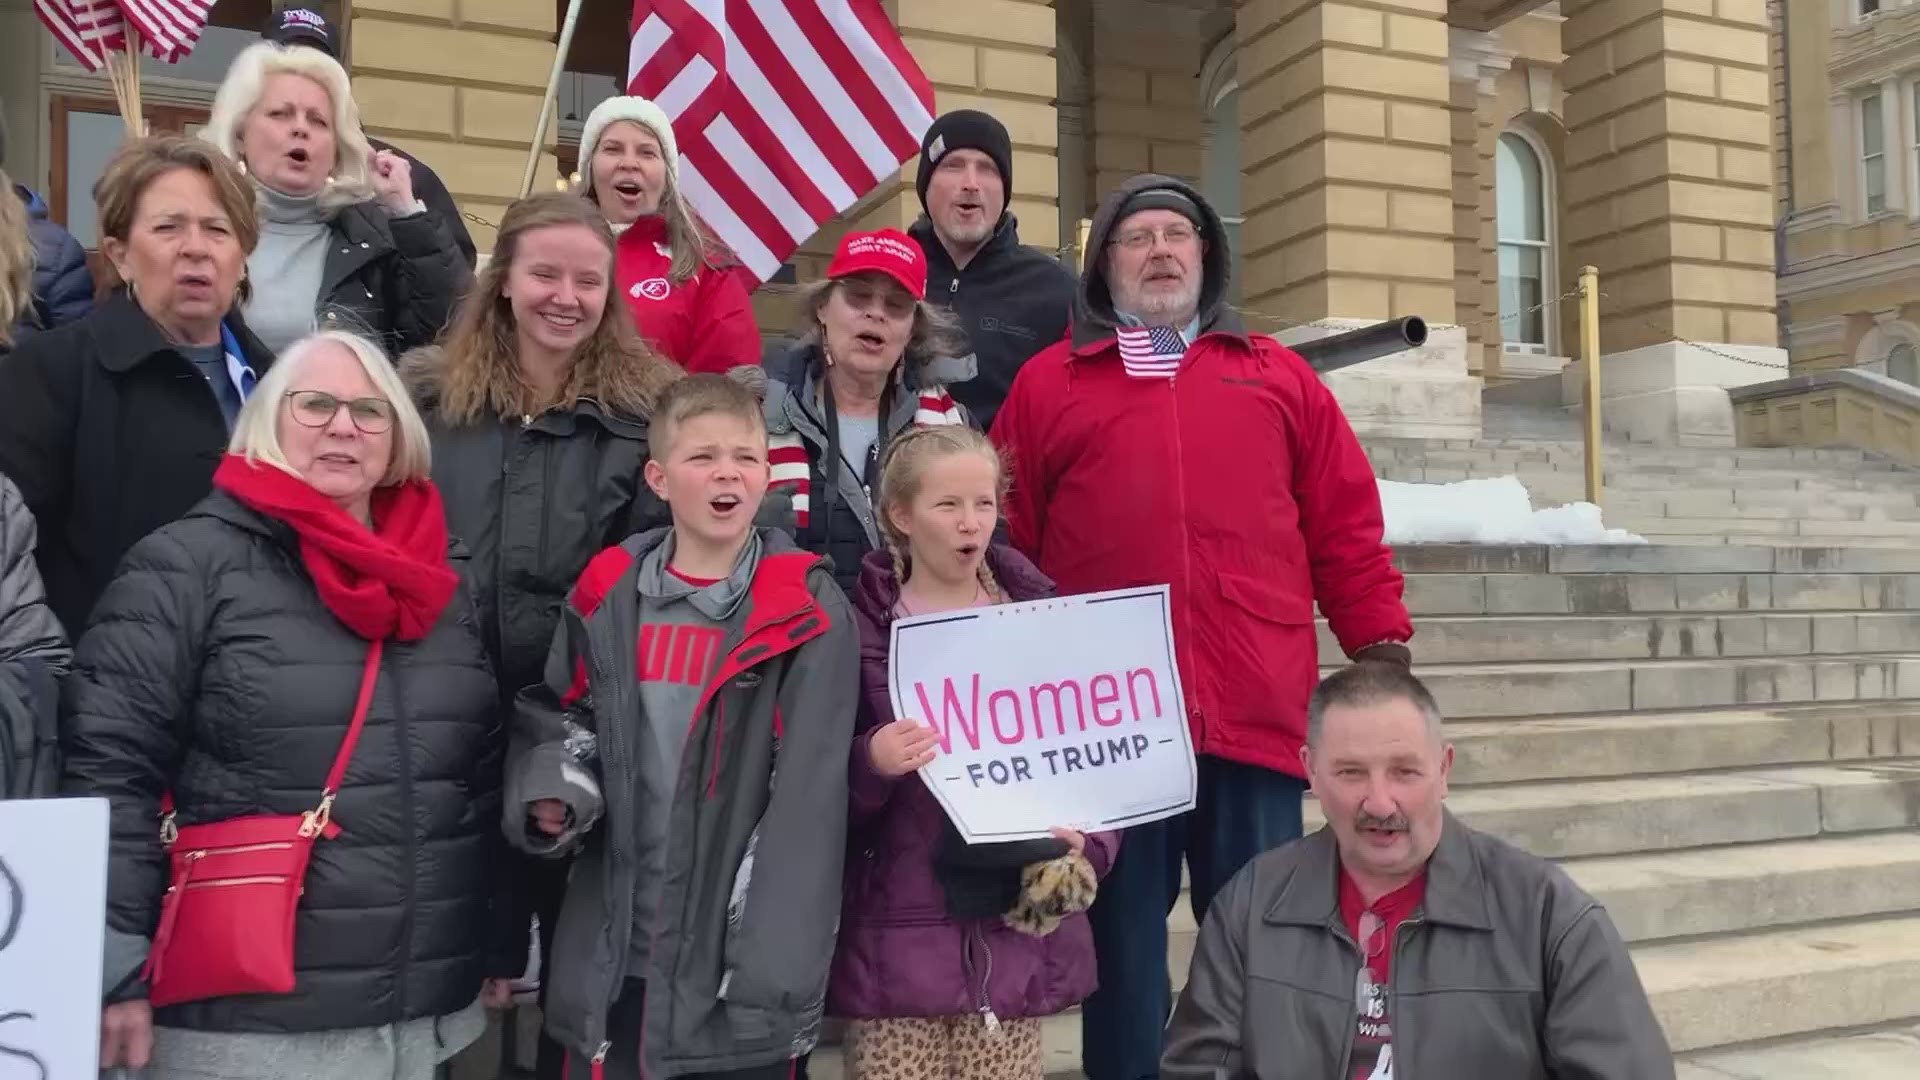 Iowa Trump supporters gathered peacefully at the statehouse while others in Washington. D.C. violently breached the U.S. Capitol.